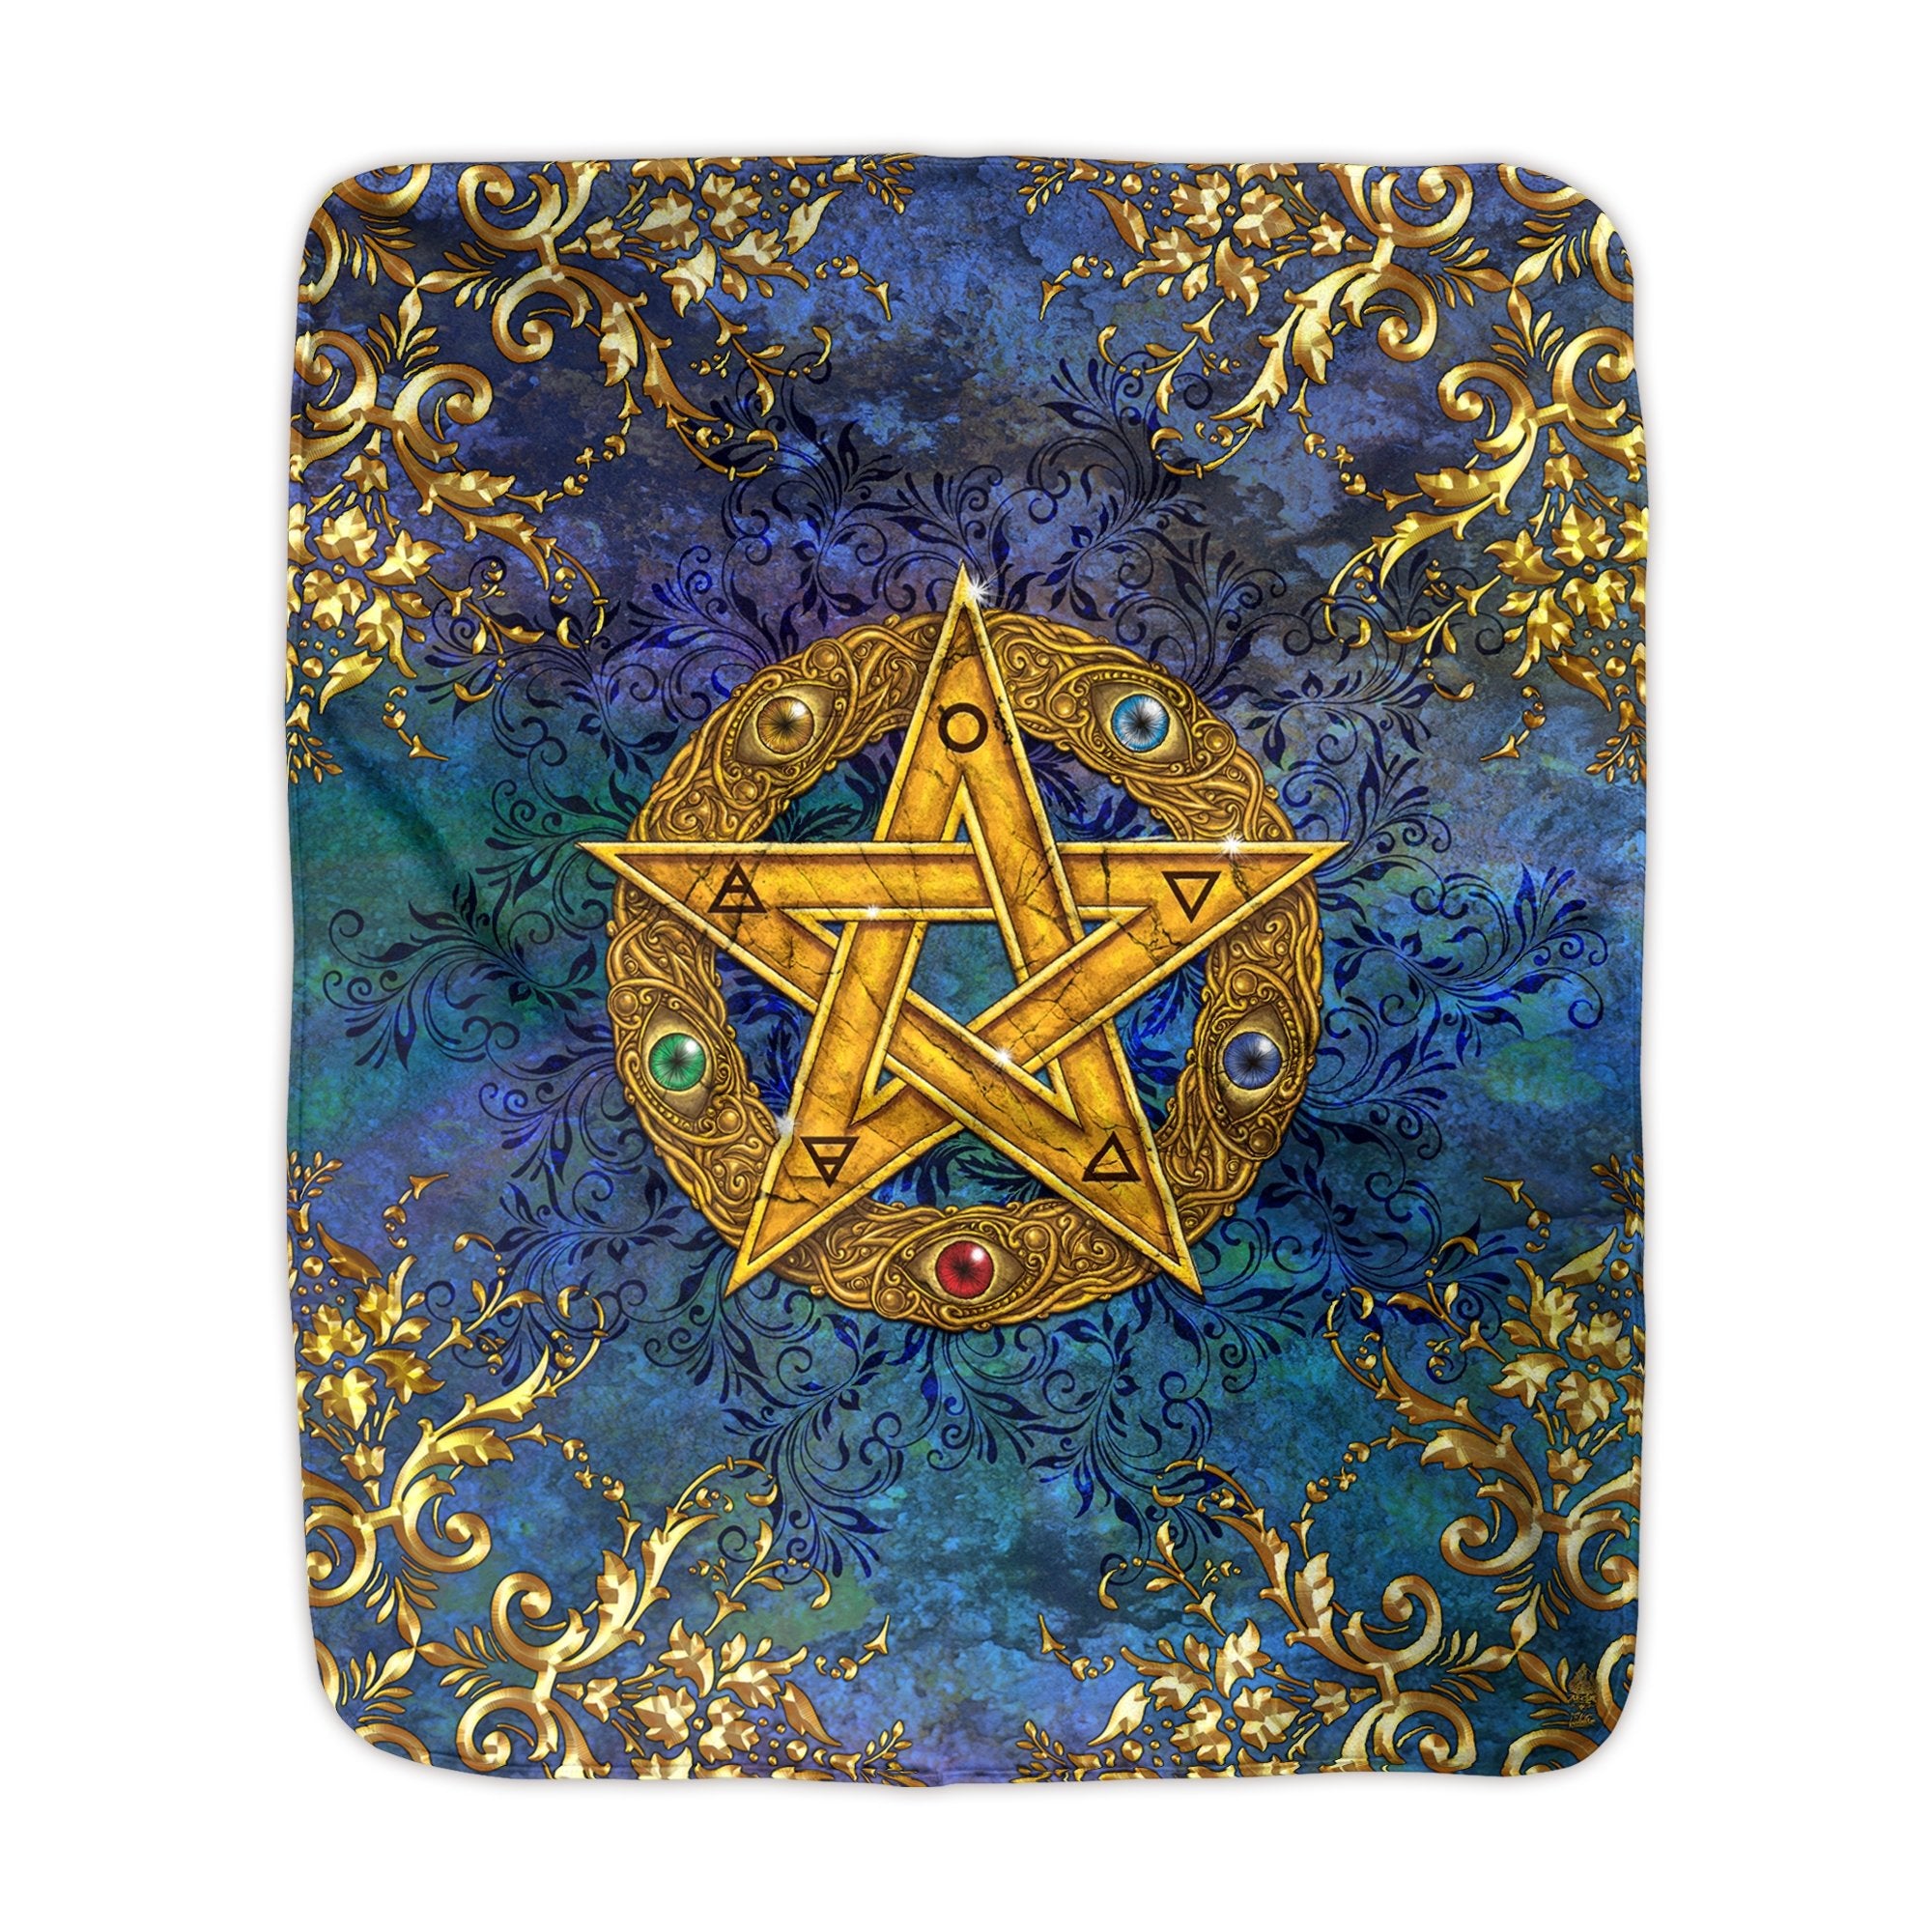 Wicca Throw Fleece Blanket, Pagan Decor, Witch Room - Gold Pentacle - Abysm Internal